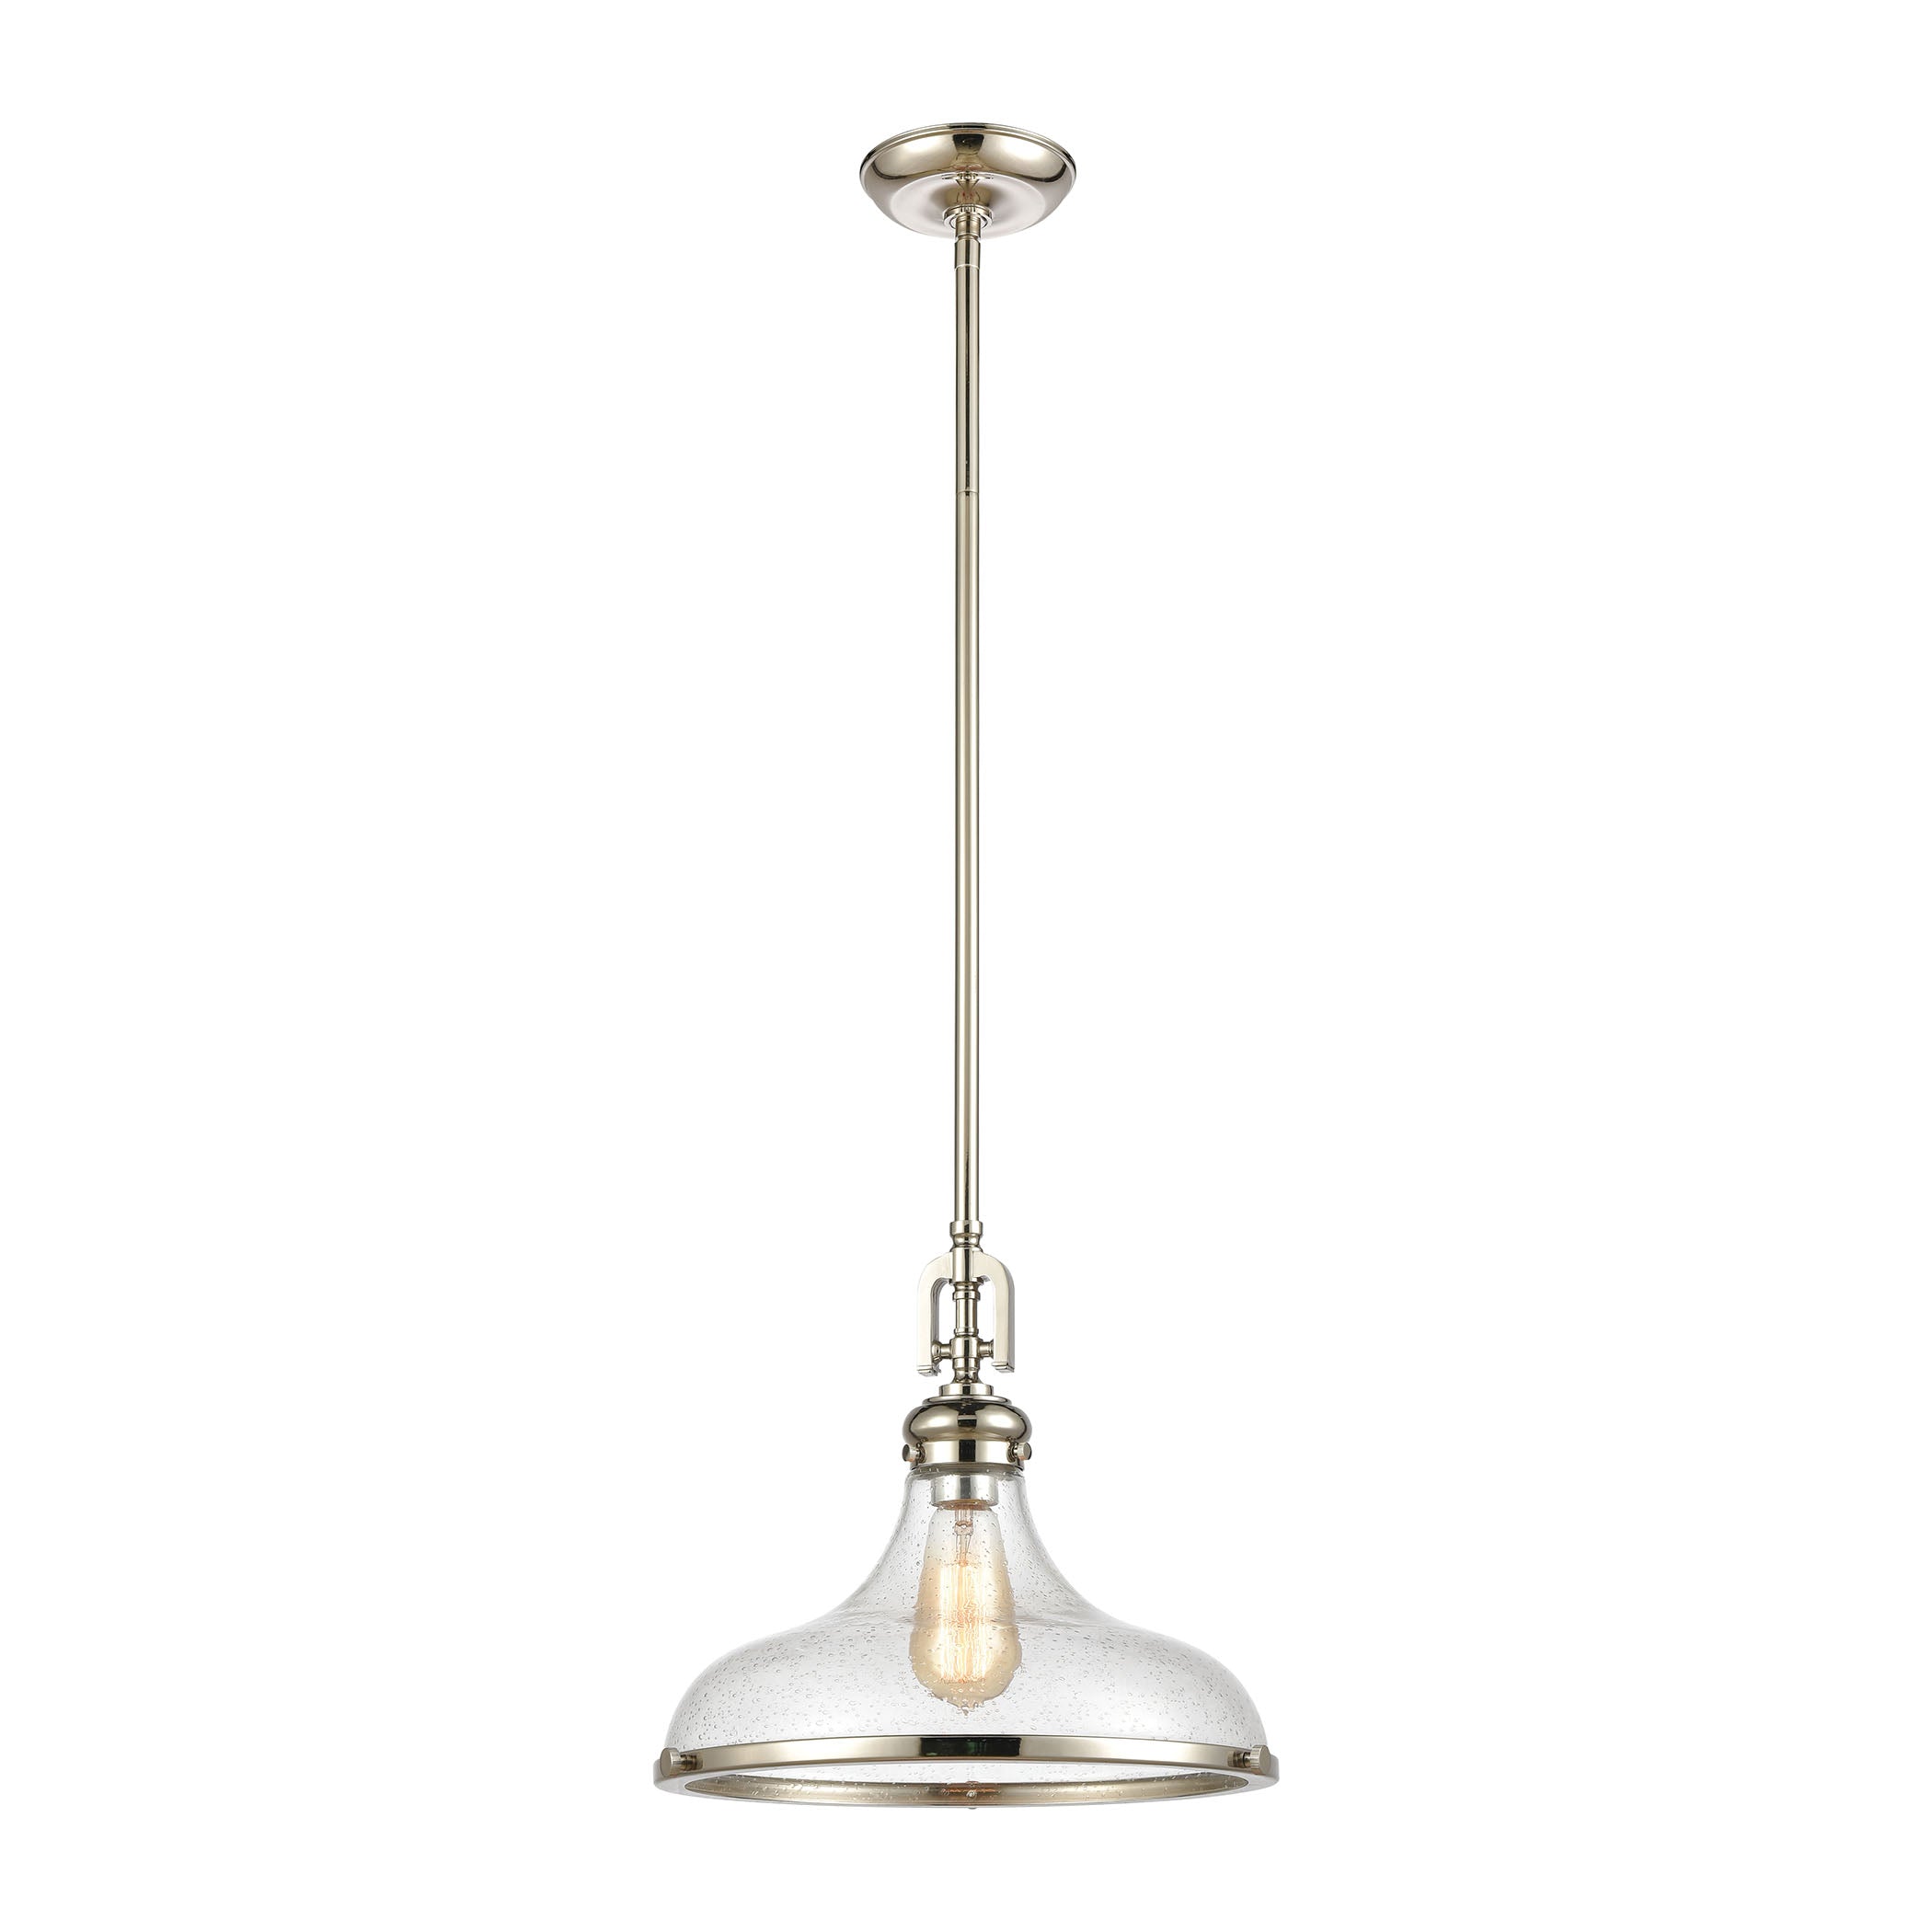 ELK Lighting 57381/1 Rutherford 1-Light Pendant in Polished Nickel with Seedy Glass